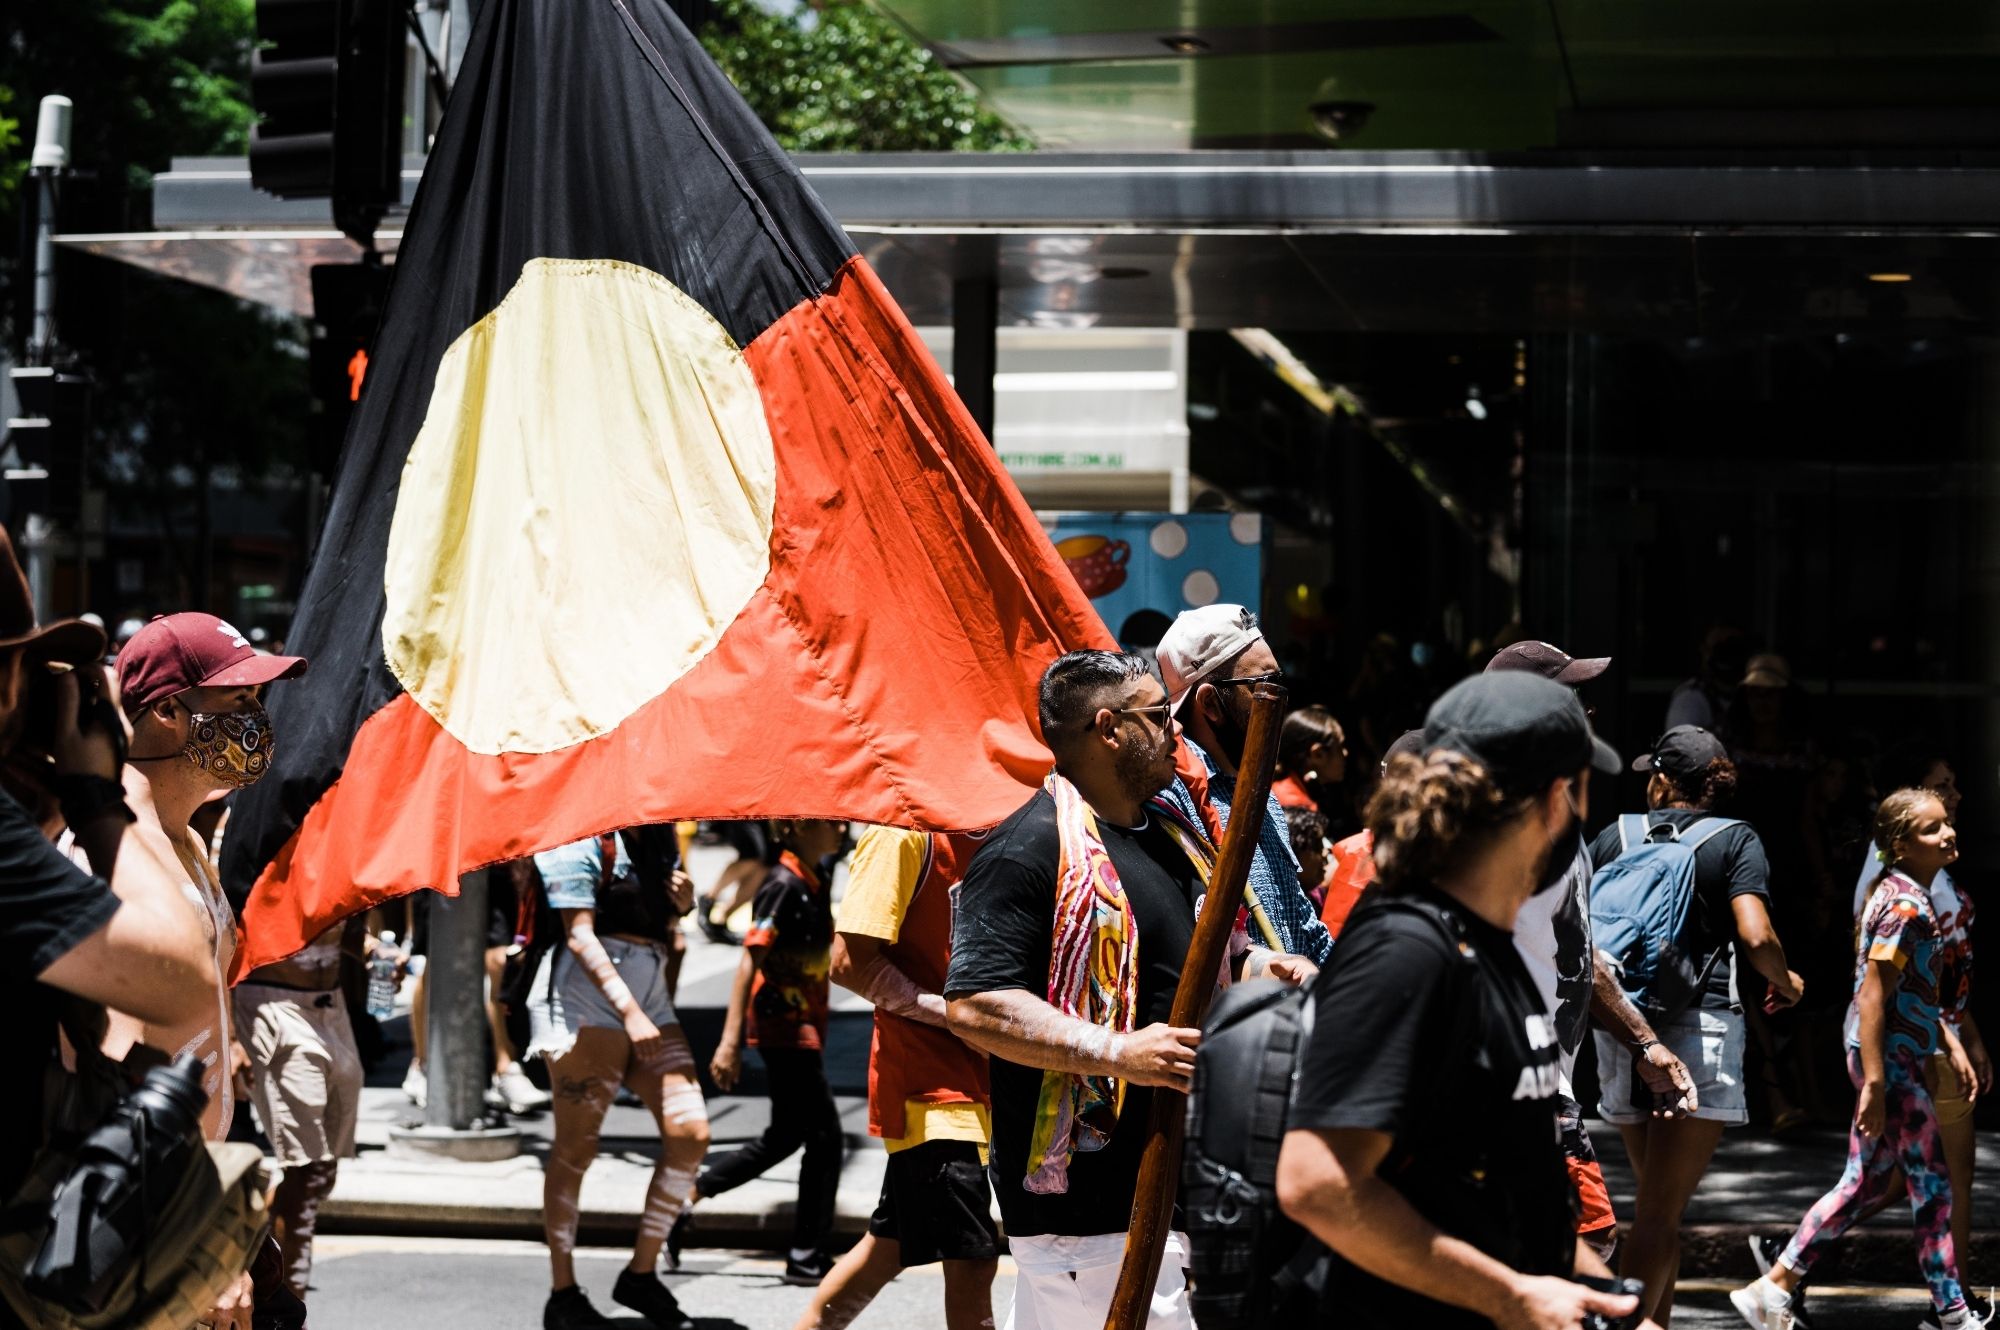 First Nations justice rally with large Aboriginal flag